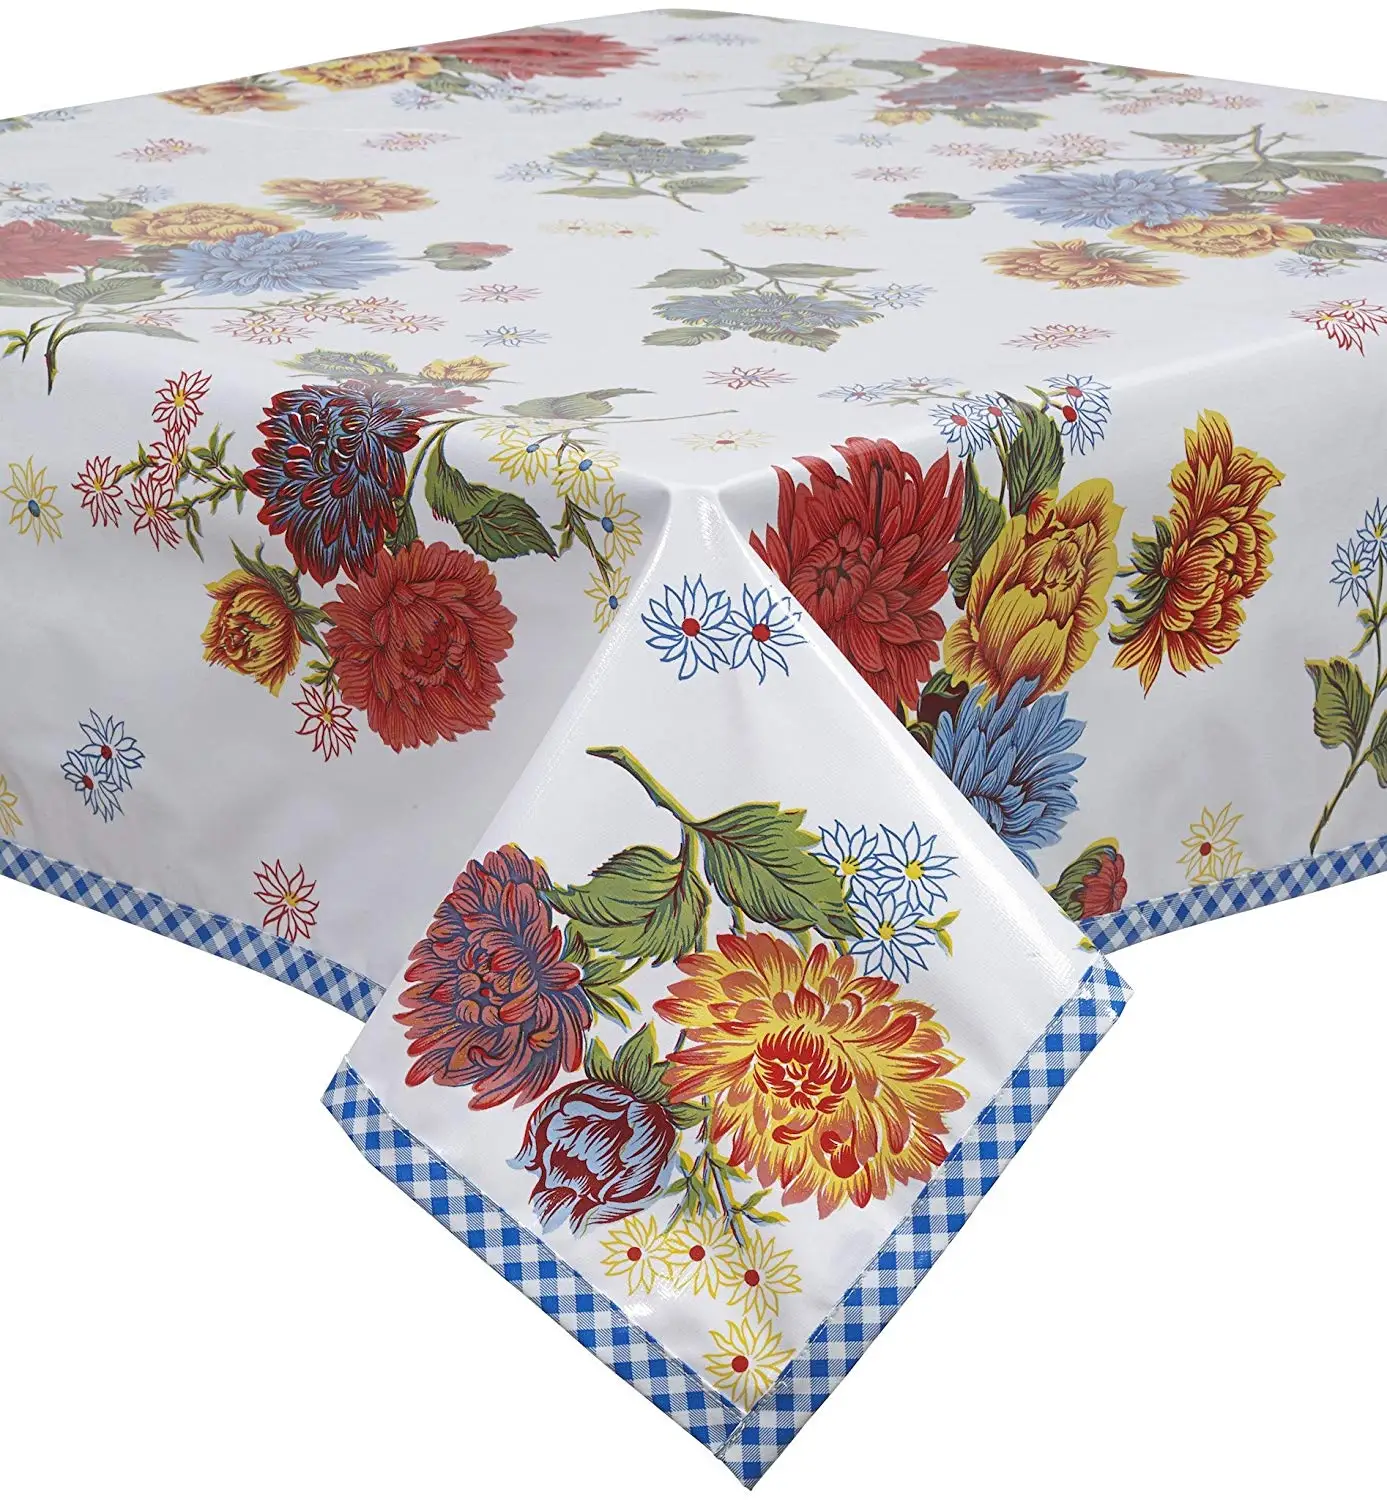 Alluring oilcloth tablecloth oval Cheap Oilcloth Tablecloth Oval Find Deals On Line At Alibaba Com